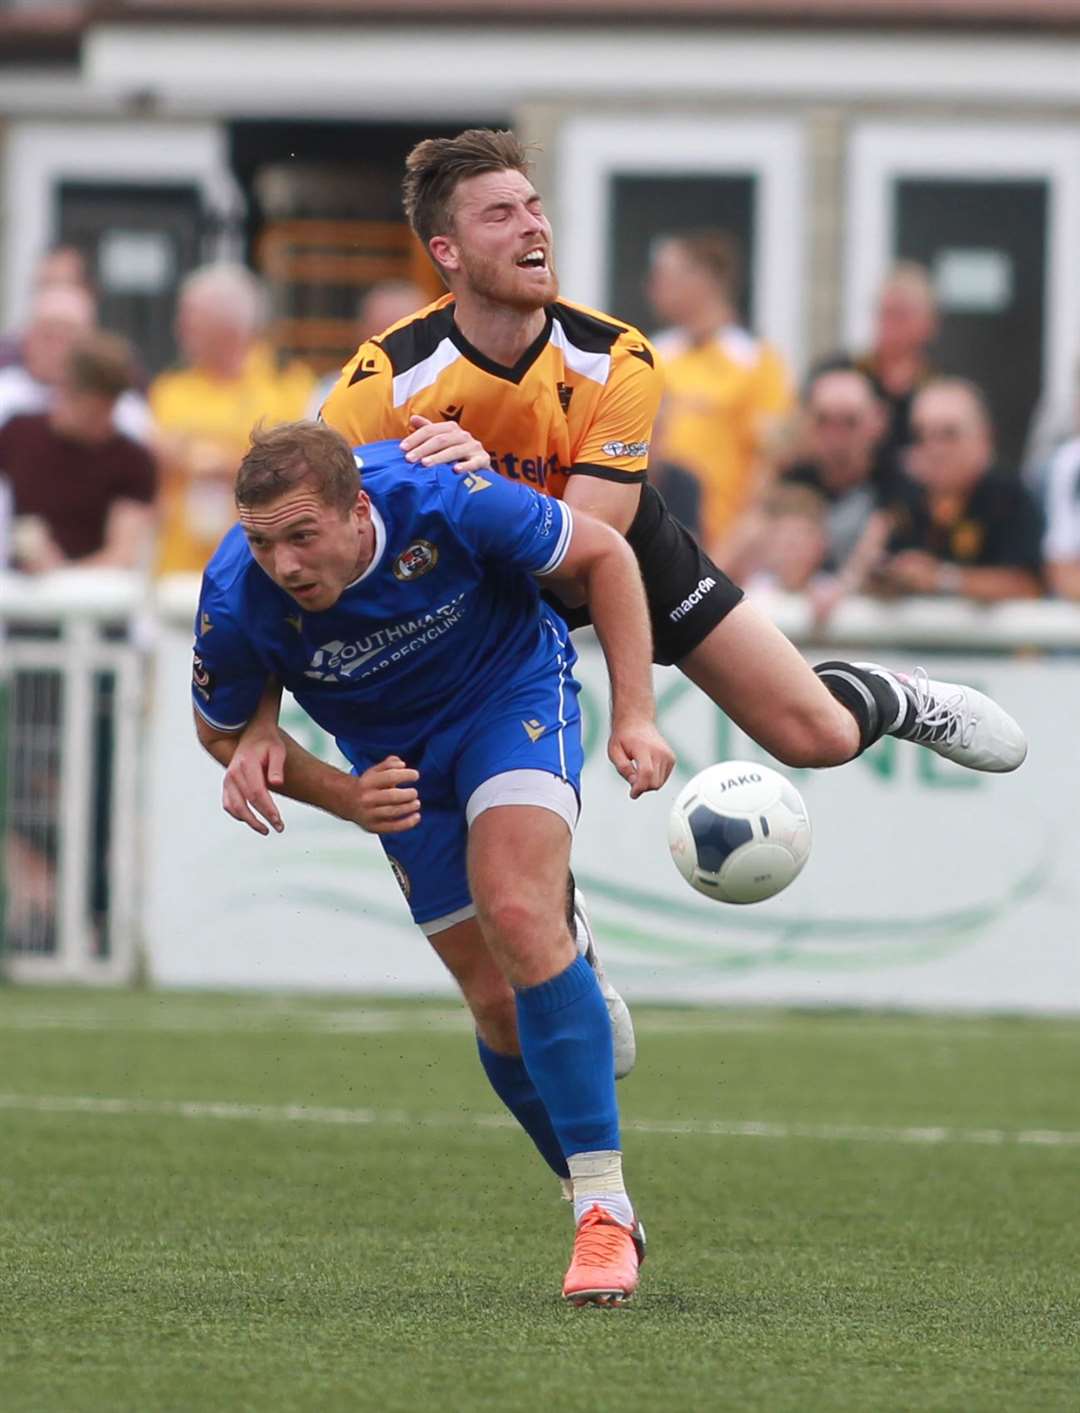 Margate summer signing Lewis Knight spent the 2019/20 season at Maidstone Picture: John Westhrop